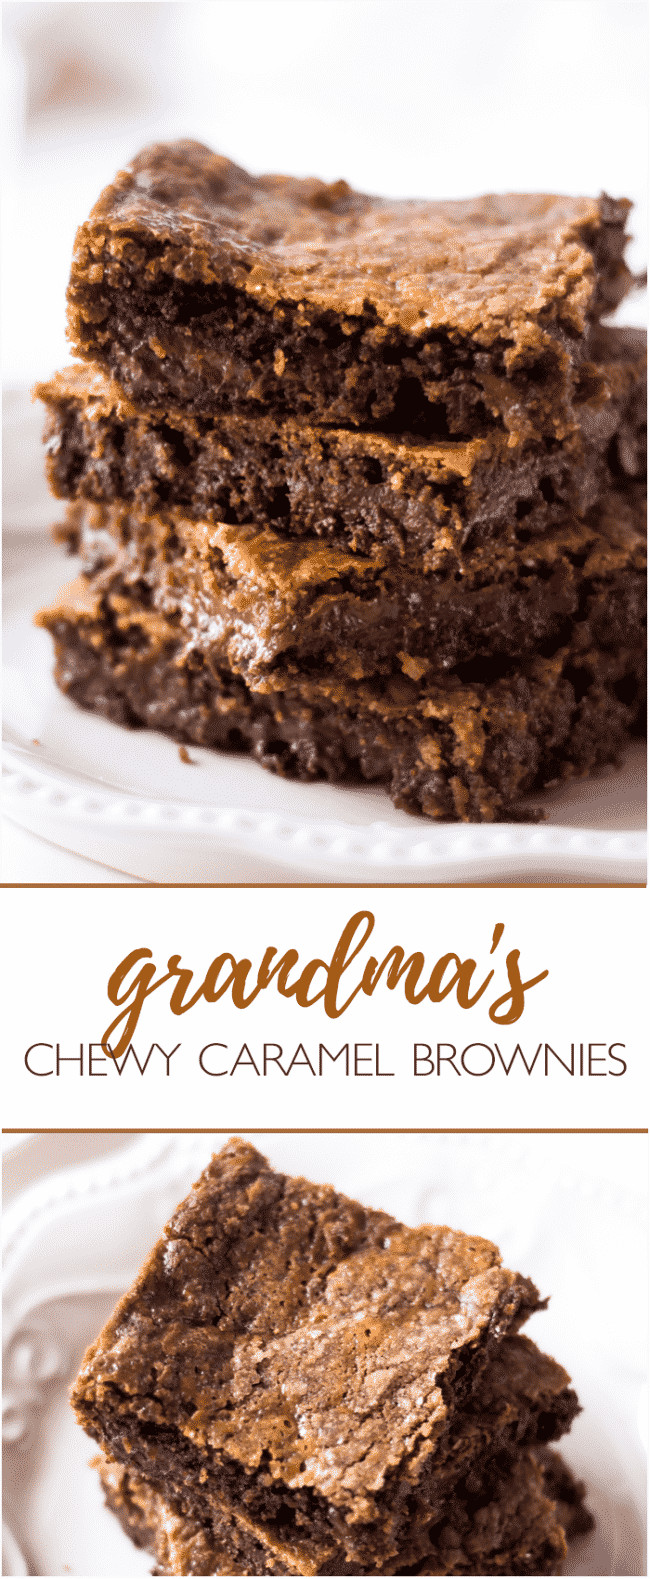 Brownies From Cake Mix
 Grandma s Chewy Caramel Brownies Recipe